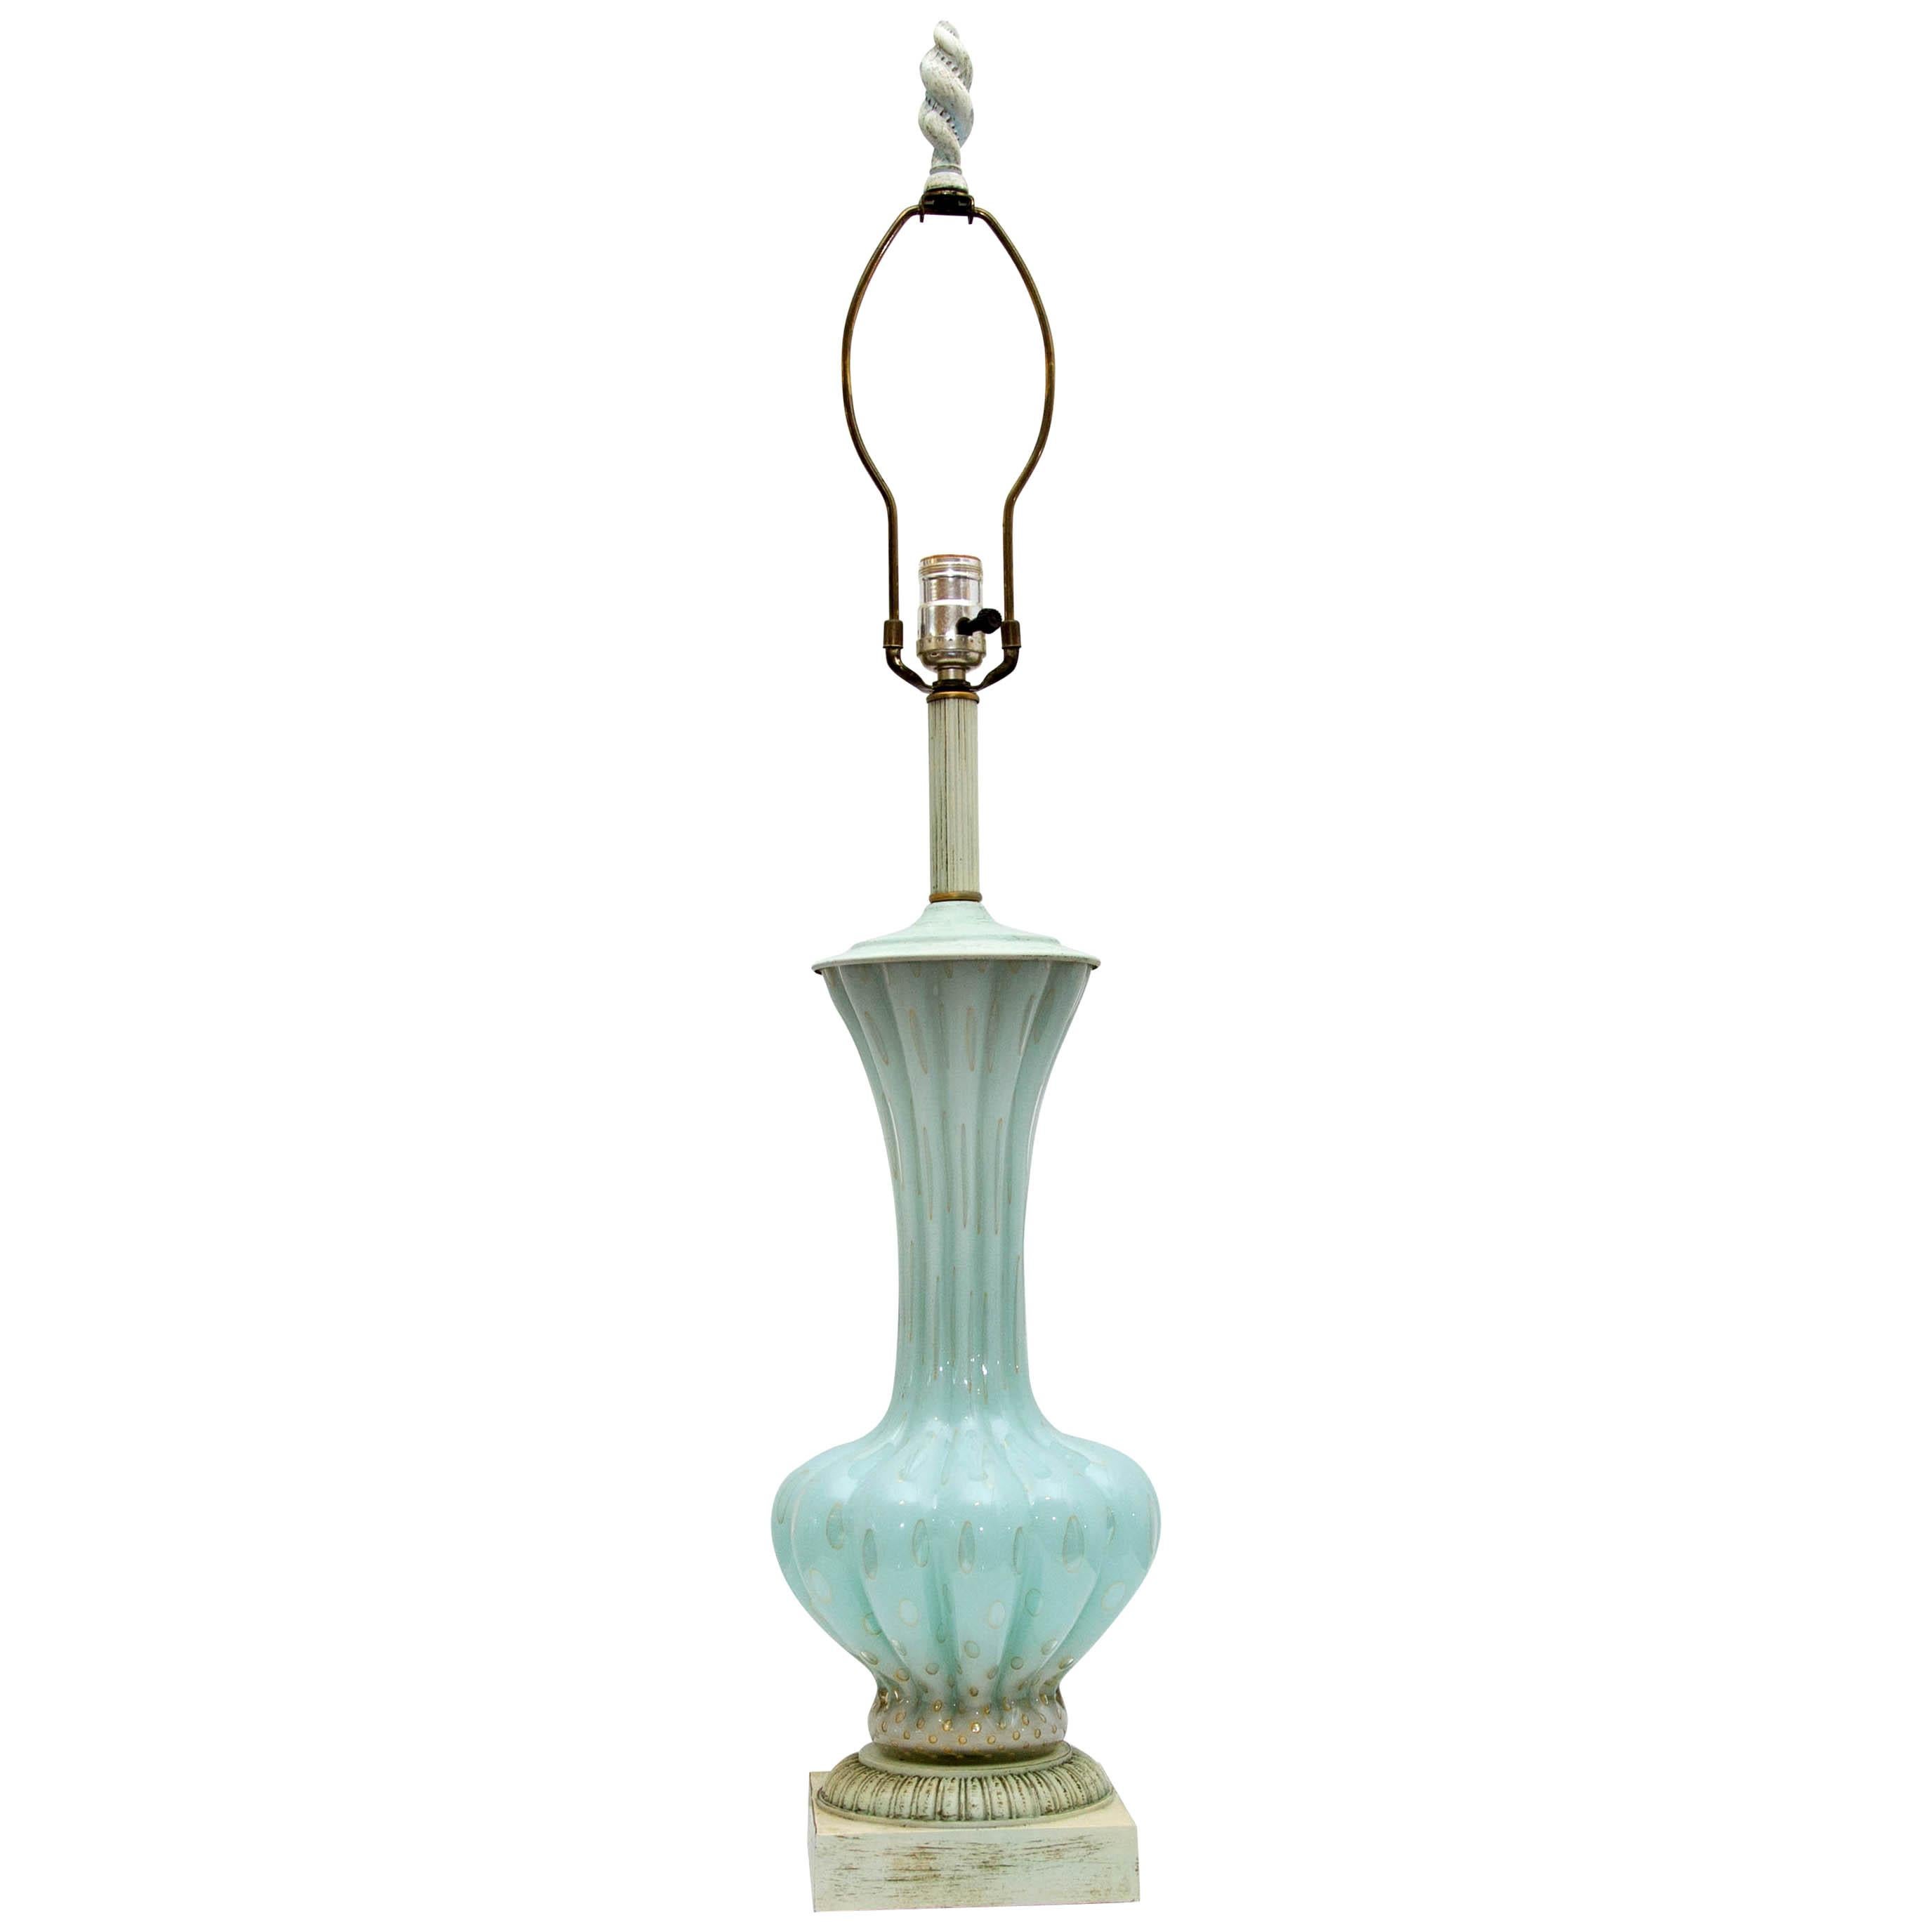 Murano Glass Lamp Light Blue with Gold Flakes, Mid-Century Modern